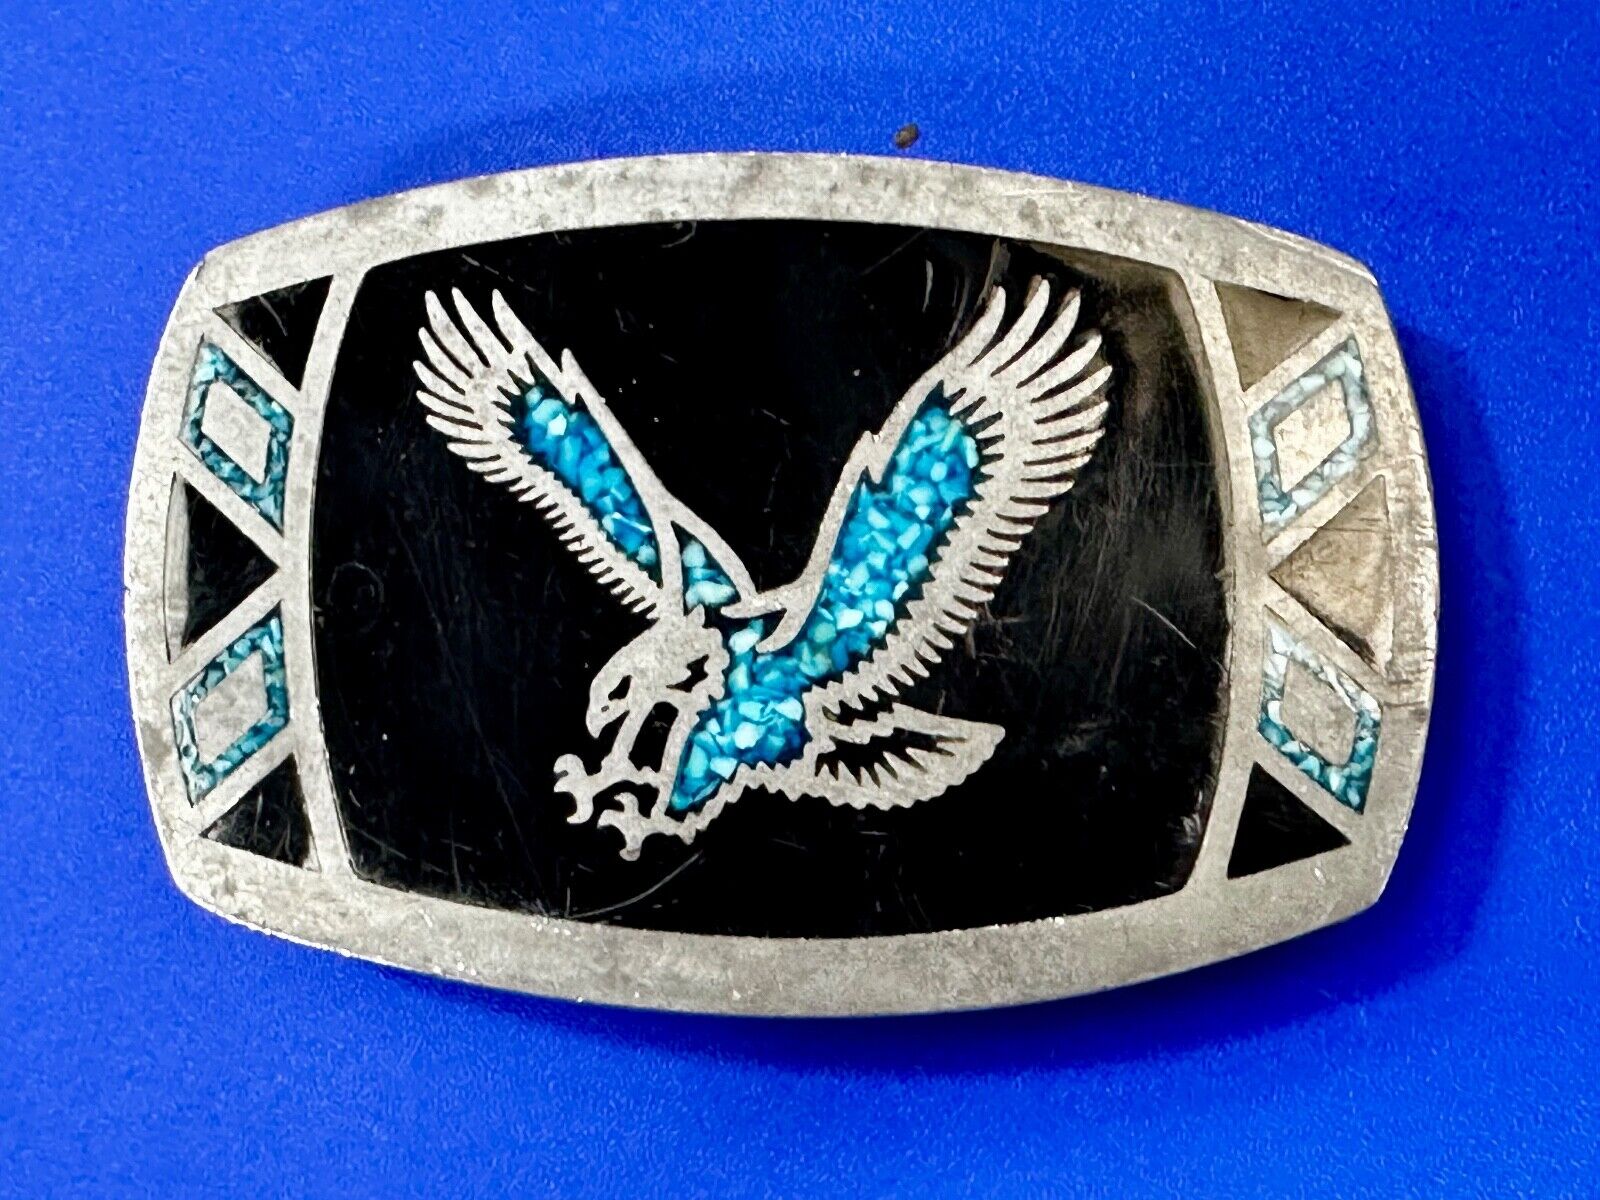 Flying Bald Eagle Turquoise Chip Inlaid Black Silver Color Western Belt Buckle